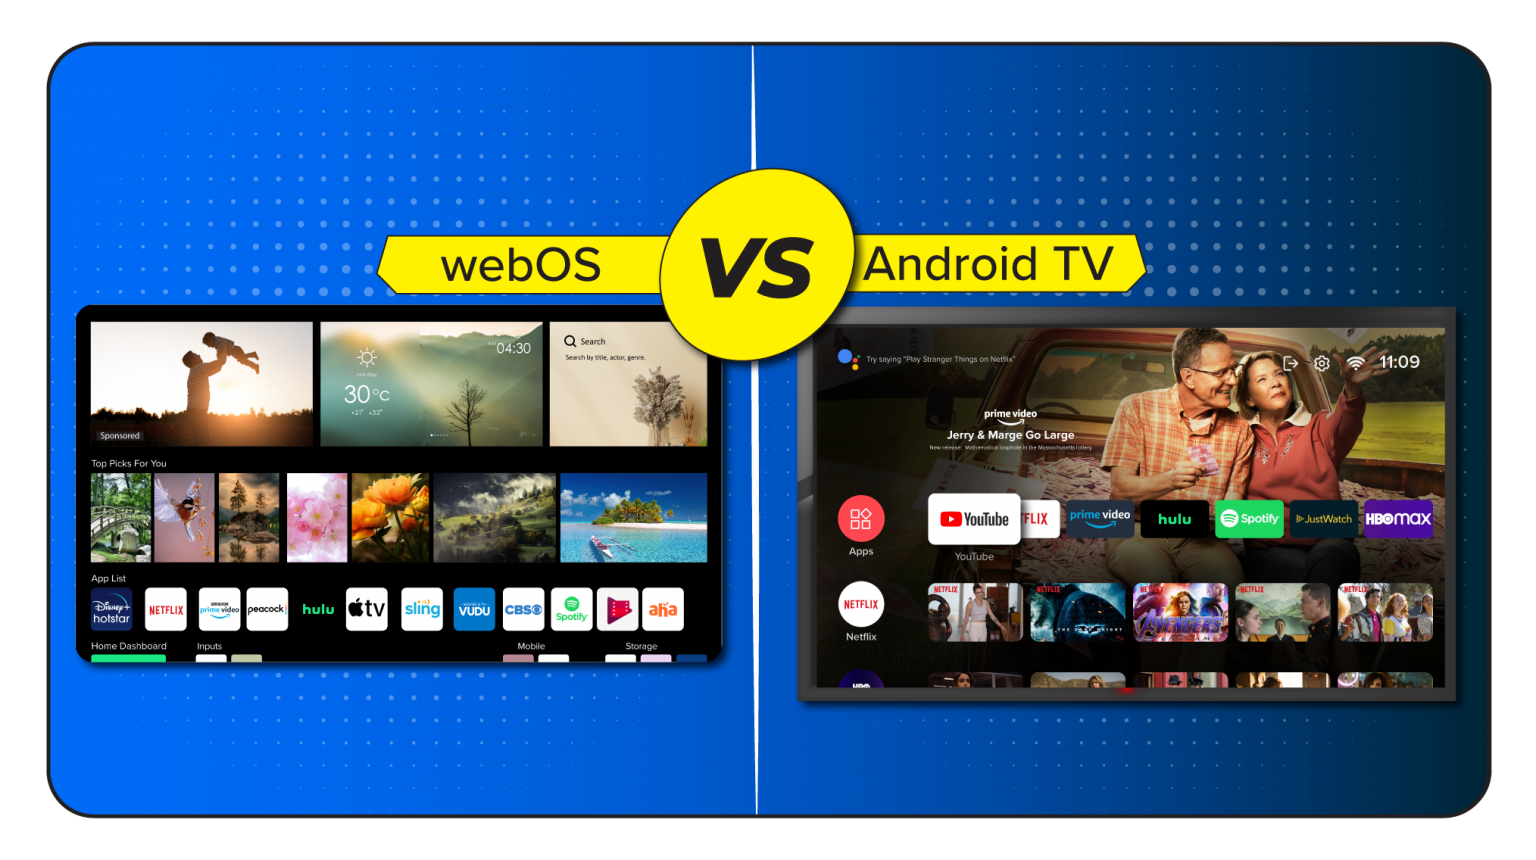 Google TV Vs Android TV: A Comparative Guide - Muvi One